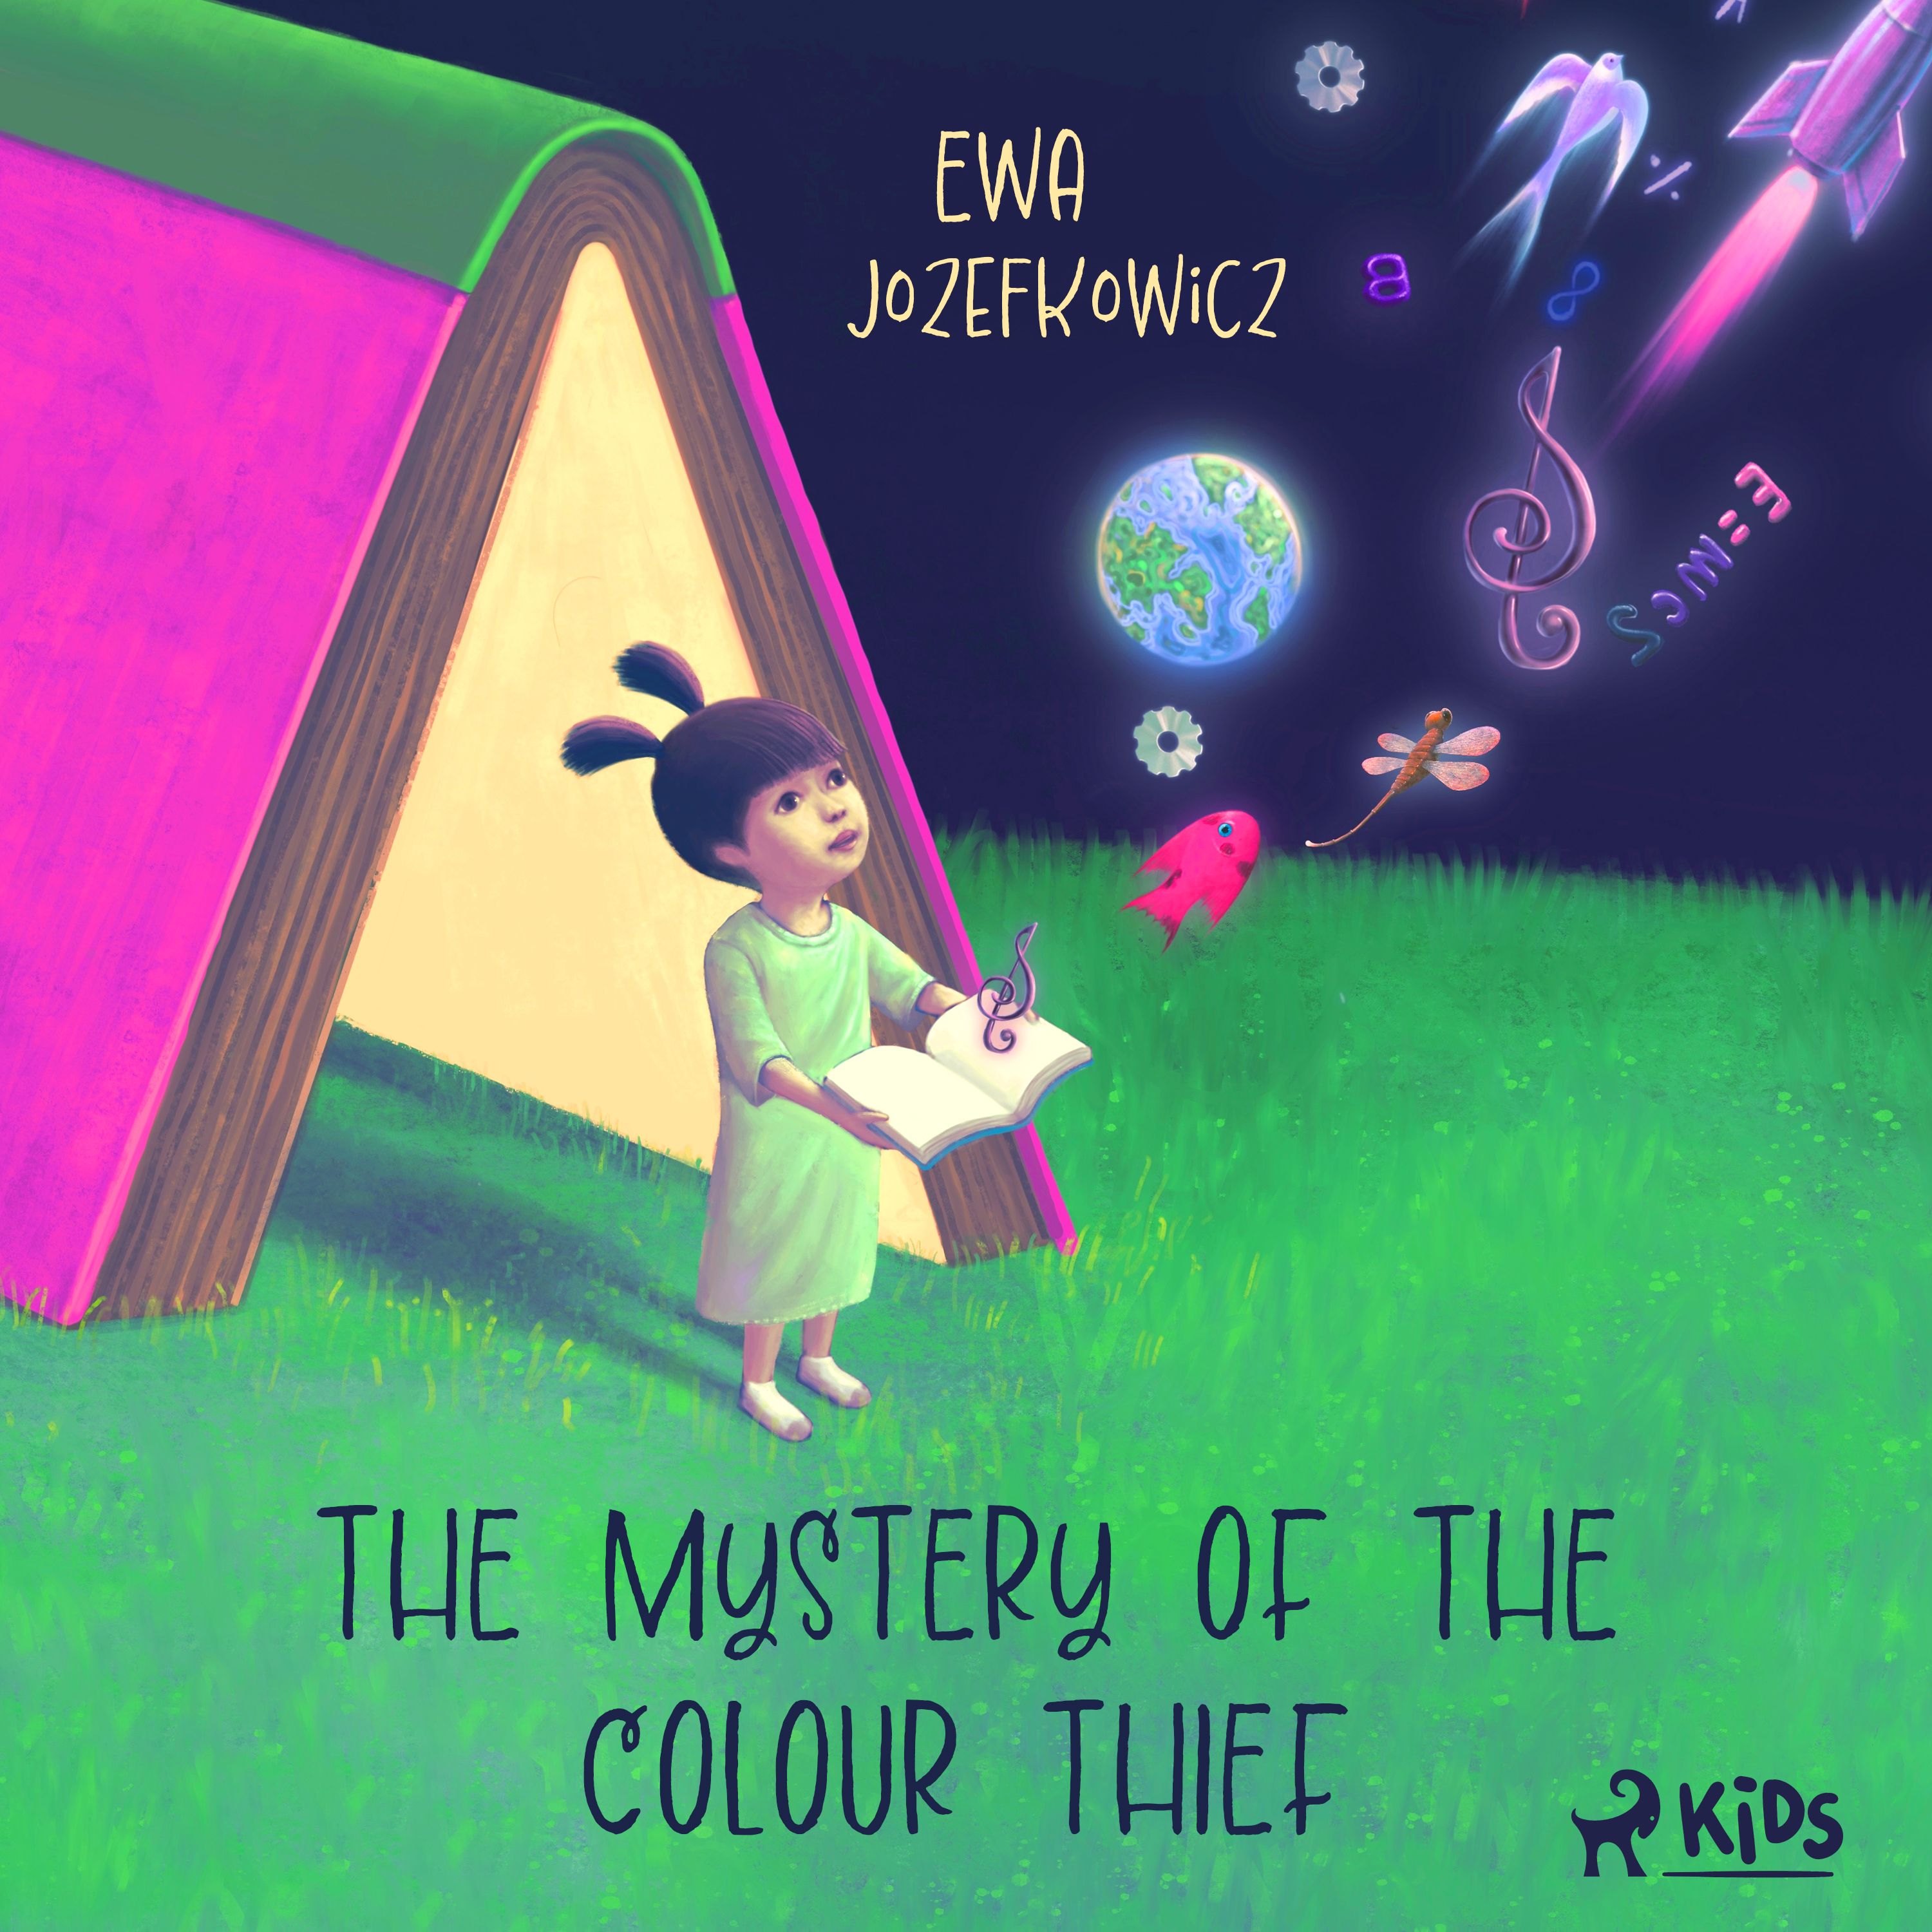 The Mystery of the Colour Thief, lydbog af Ewa Jozefkowicz